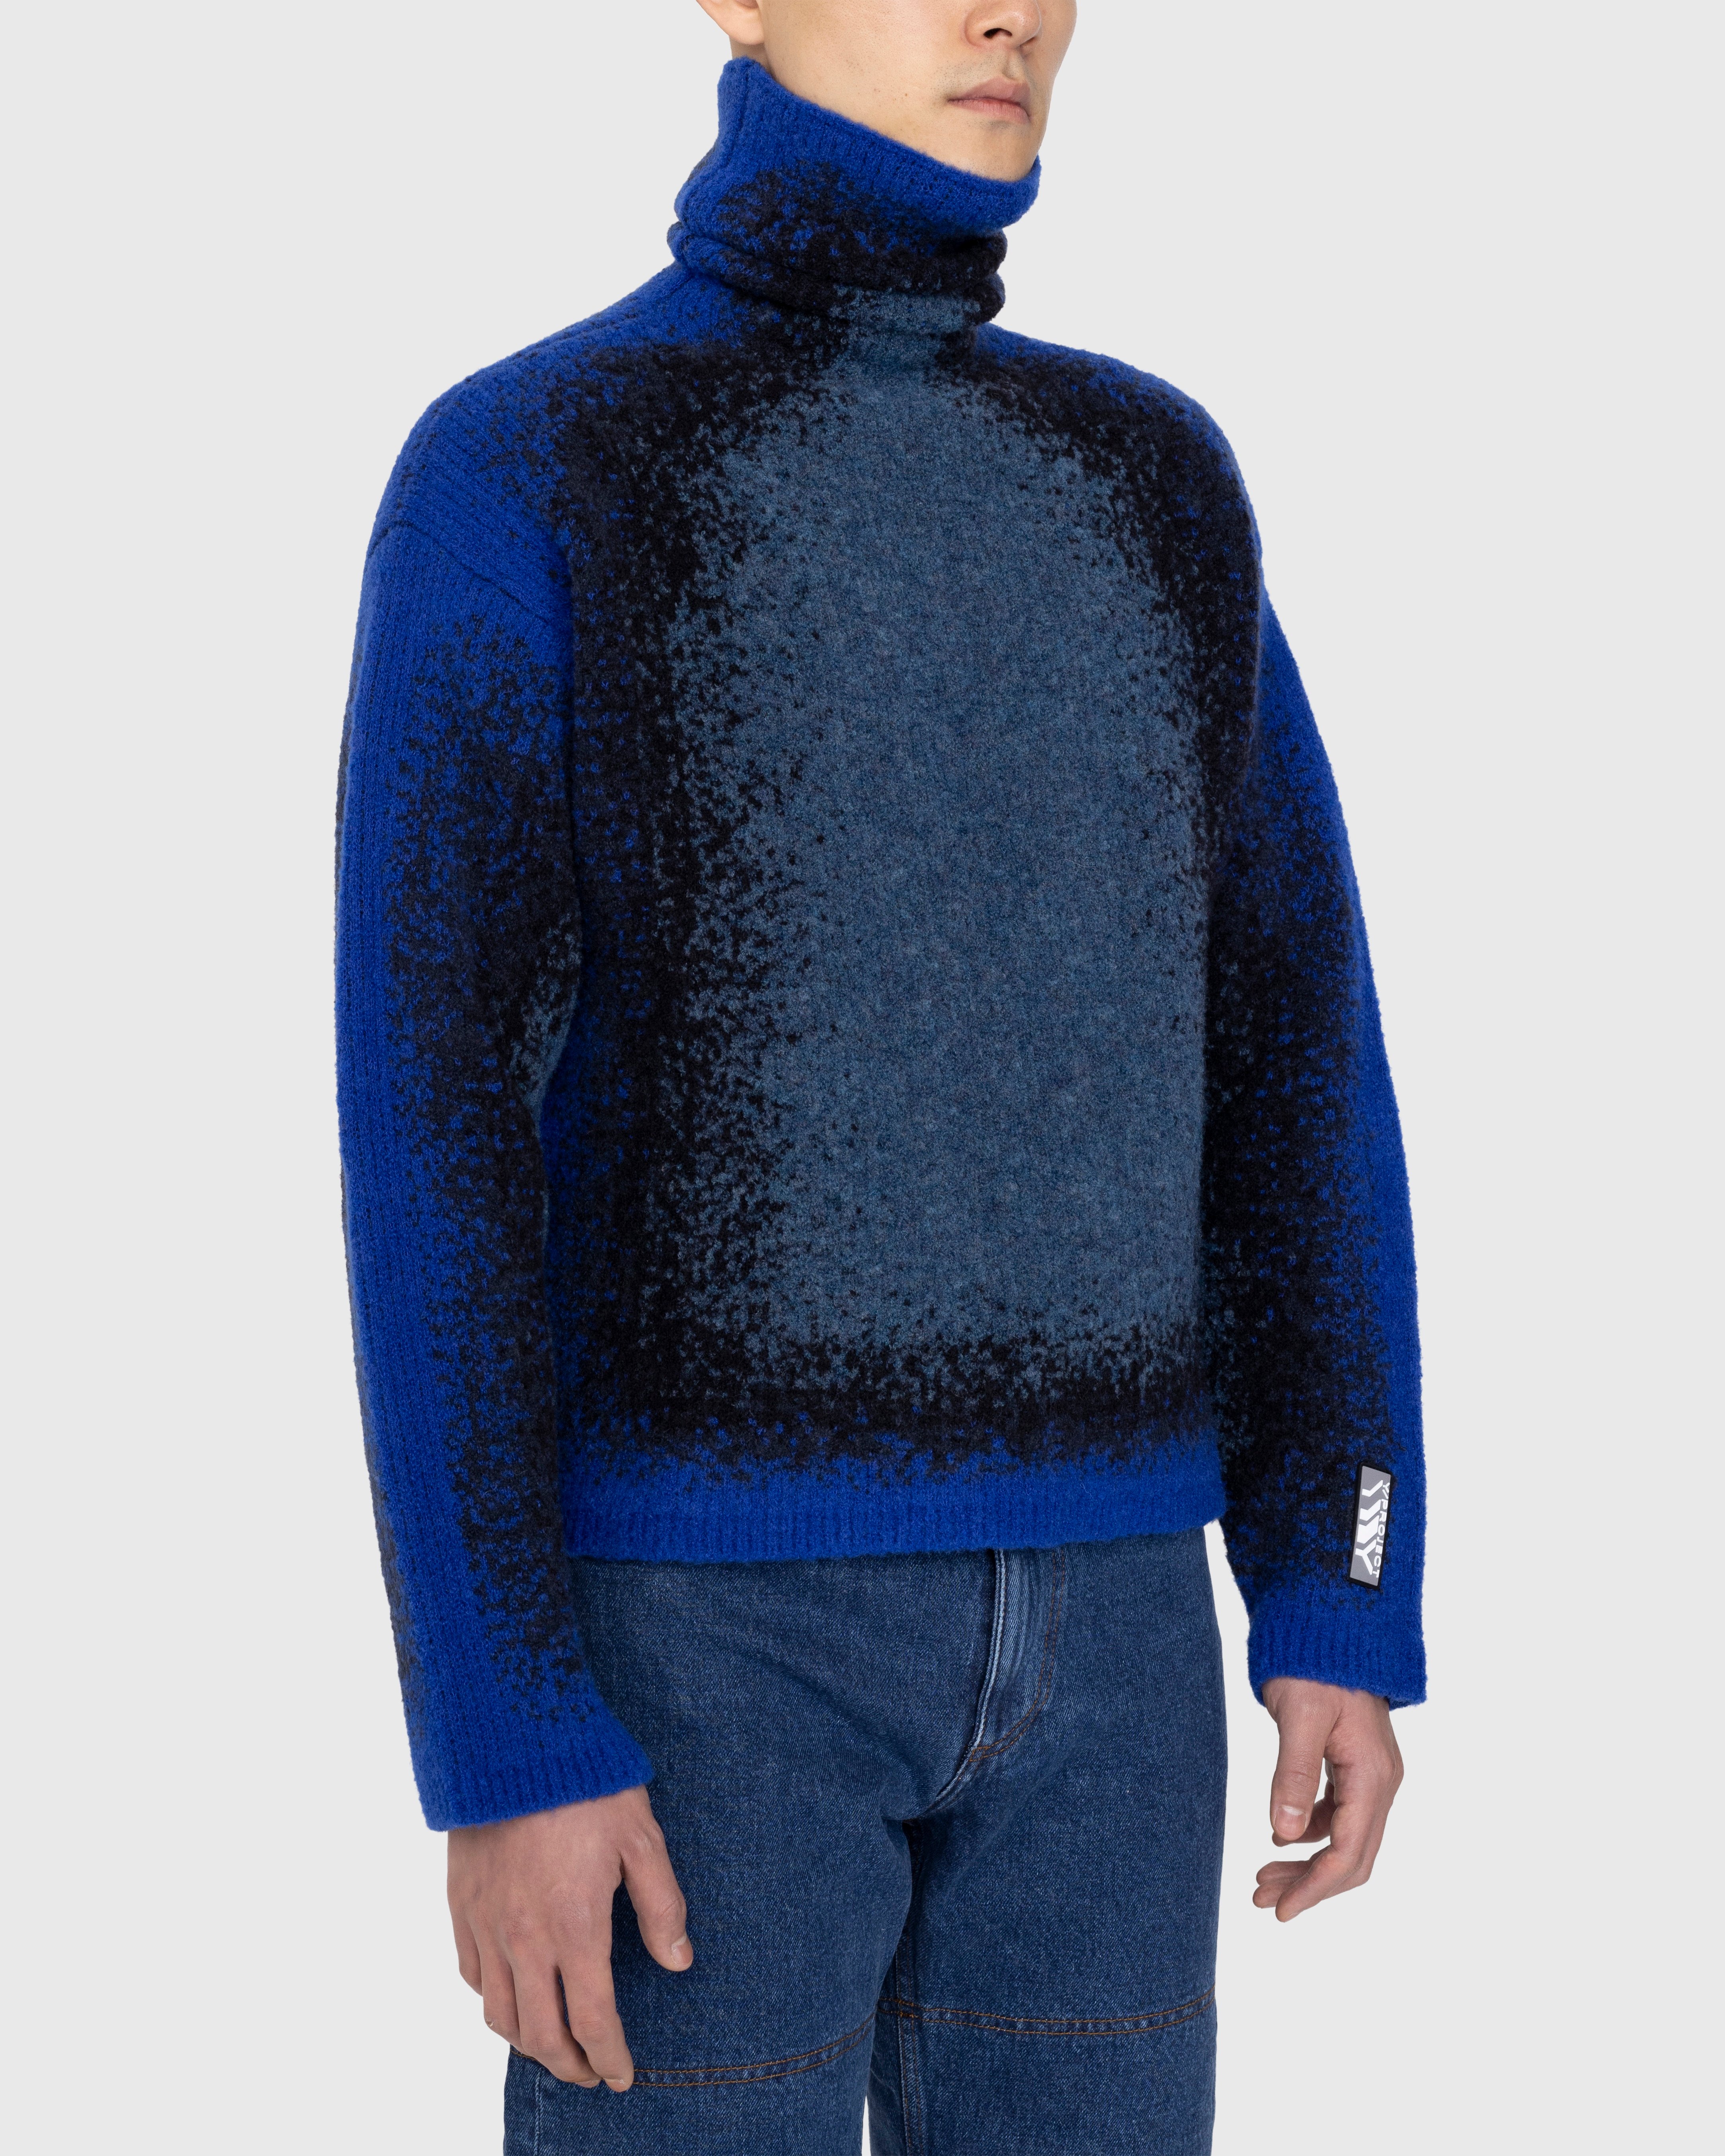 Y/Project - Gradient Heavy Knit Turtleneck Blue - Clothing - Blue - Image 4